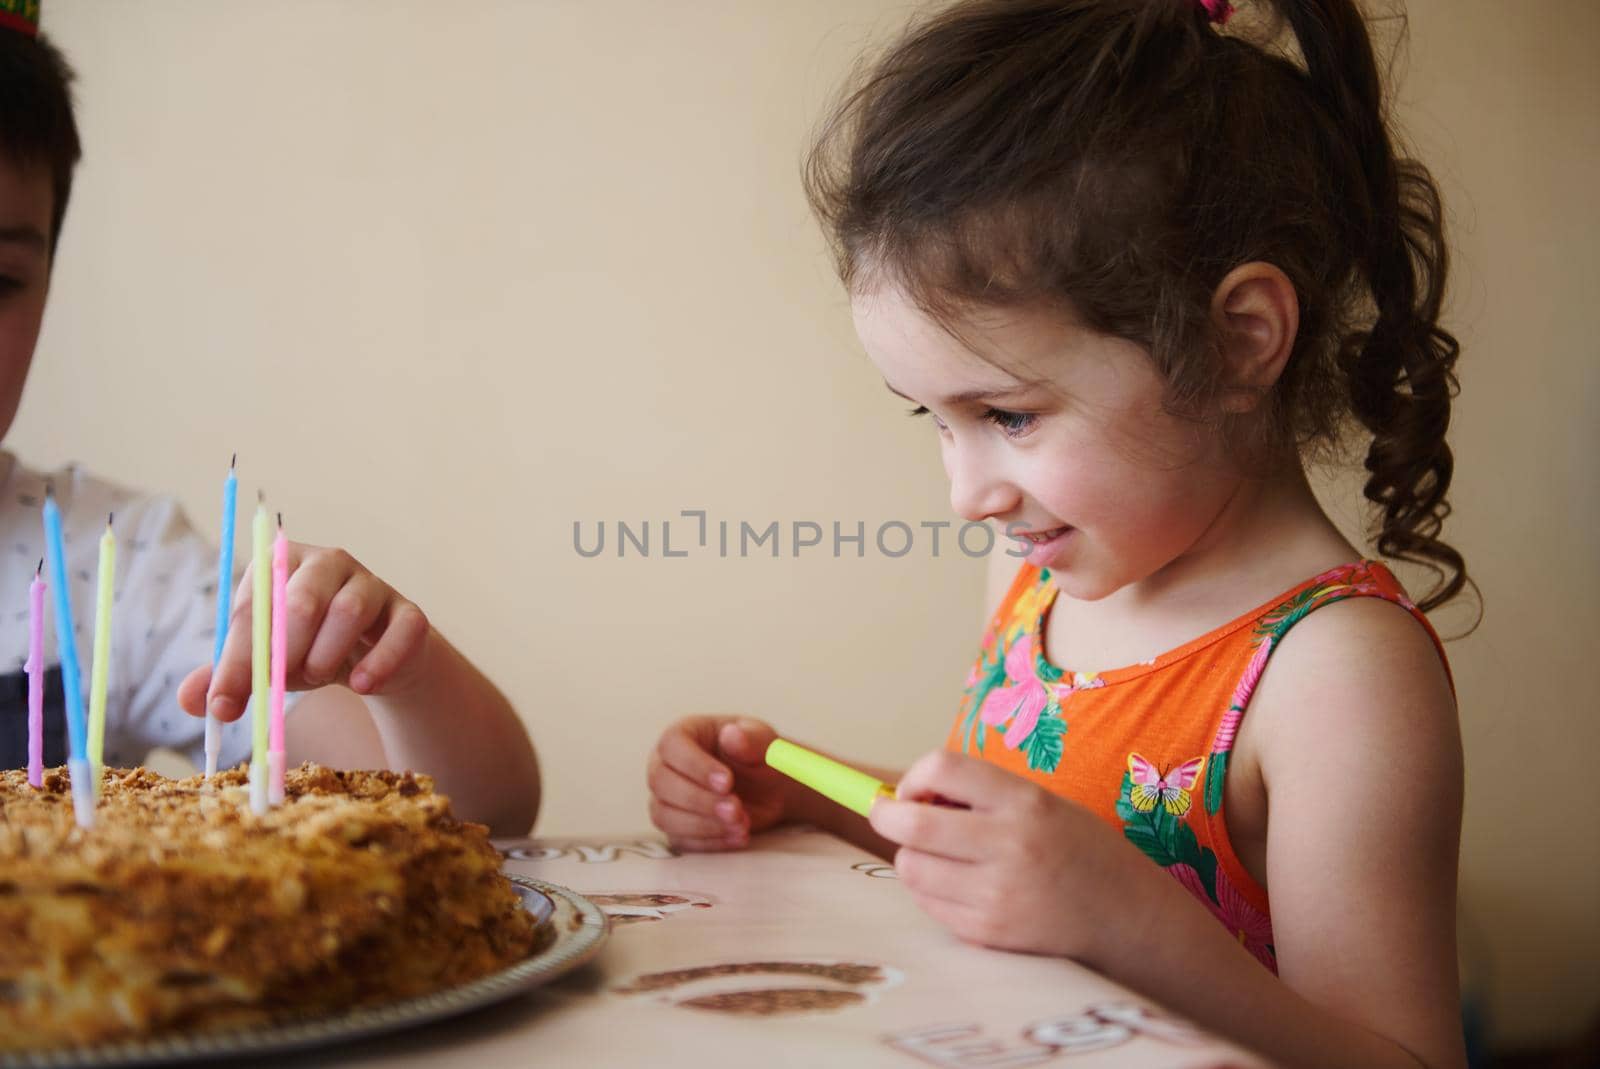 Close up portrait of a happy smiling adorable child, 5 year old girl standing at the table with a birthday cake. Celebration, anniversary event concept by artgf